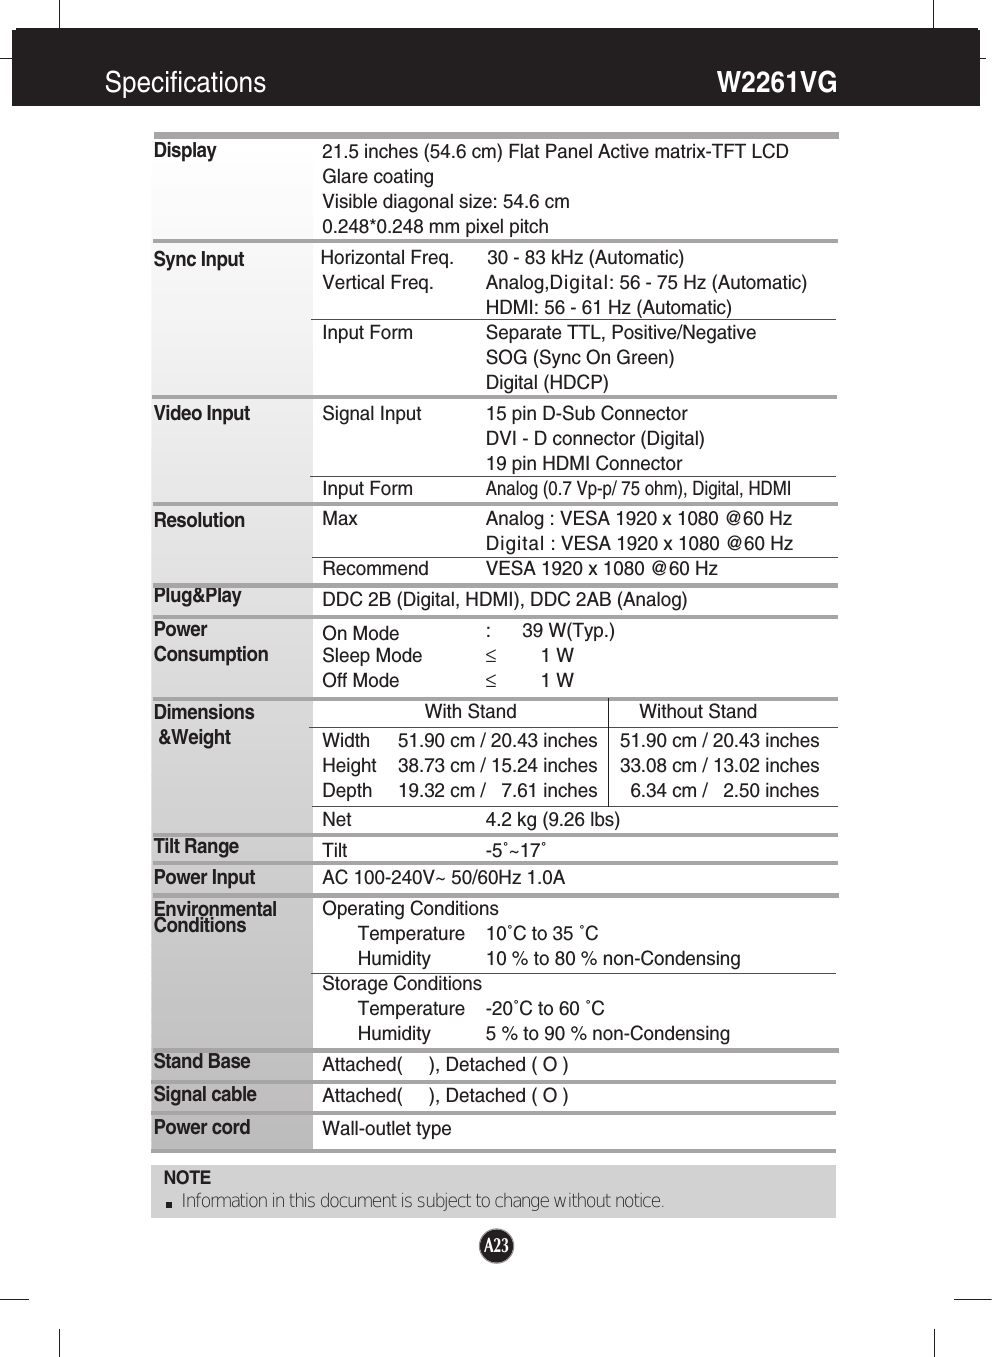 A23Specifications W2261VG NOTEInformation in this document is subject to change without notice.DisplaySync InputVideo InputResolutionPlug&amp;PlayPowerConsumptionDimensions&amp;WeightTilt RangePower InputEnvironmentalConditionsStand BaseSignal cablePower cord 21.5 inches (54.6 cm) Flat Panel Active matrix-TFT LCD Glare coatingVisible diagonal size: 54.6 cm0.248*0.248 mm pixel pitchHorizontal Freq. 30 - 83 kHz (Automatic)Vertical Freq. Analog,Digital: 56 - 75 Hz (Automatic)HDMI: 56 - 61 Hz (Automatic)Input Form Separate TTL, Positive/NegativeSOG (Sync On Green) Digital (HDCP)Signal Input 15 pin D-Sub ConnectorDVI - D connector (Digital)19 pin HDMI ConnectorInput FormAnalog (0.7 Vp-p/ 75 ohm), Digital, HDMIMax Analog : VESA 1920 x 1080 @60 HzDigital : VESA 1920 x 1080 @60 HzRecommend VESA 1920 x 1080 @60 HzDDC 2B (Digital, HDMI), DDC 2AB (Analog)On Mode : 39 W(Typ.)Sleep Mode ≤1 WOff Mode ≤1 WWith Stand Without StandWidth 51.90 cm / 20.43 inches 51.90 cm / 20.43 inchesHeight 38.73 cm / 15.24 inches 33.08 cm / 13.02 inchesDepth 19.32 cm /   7.61 inches 6.34 cm /   2.50 inchesNet 4.2 kg (9.26 lbs)Tilt -5˚~17˚AC 100-240V~ 50/60Hz 1.0A Operating ConditionsTemperature 10˚C to 35 ˚CHumidity 10 % to 80 % non-CondensingStorage ConditionsTemperature -20˚C to 60 ˚CHumidity 5 % to 90 % non-CondensingAttached(     ), Detached ( O )Attached(     ), Detached ( O )Wall-outlet type